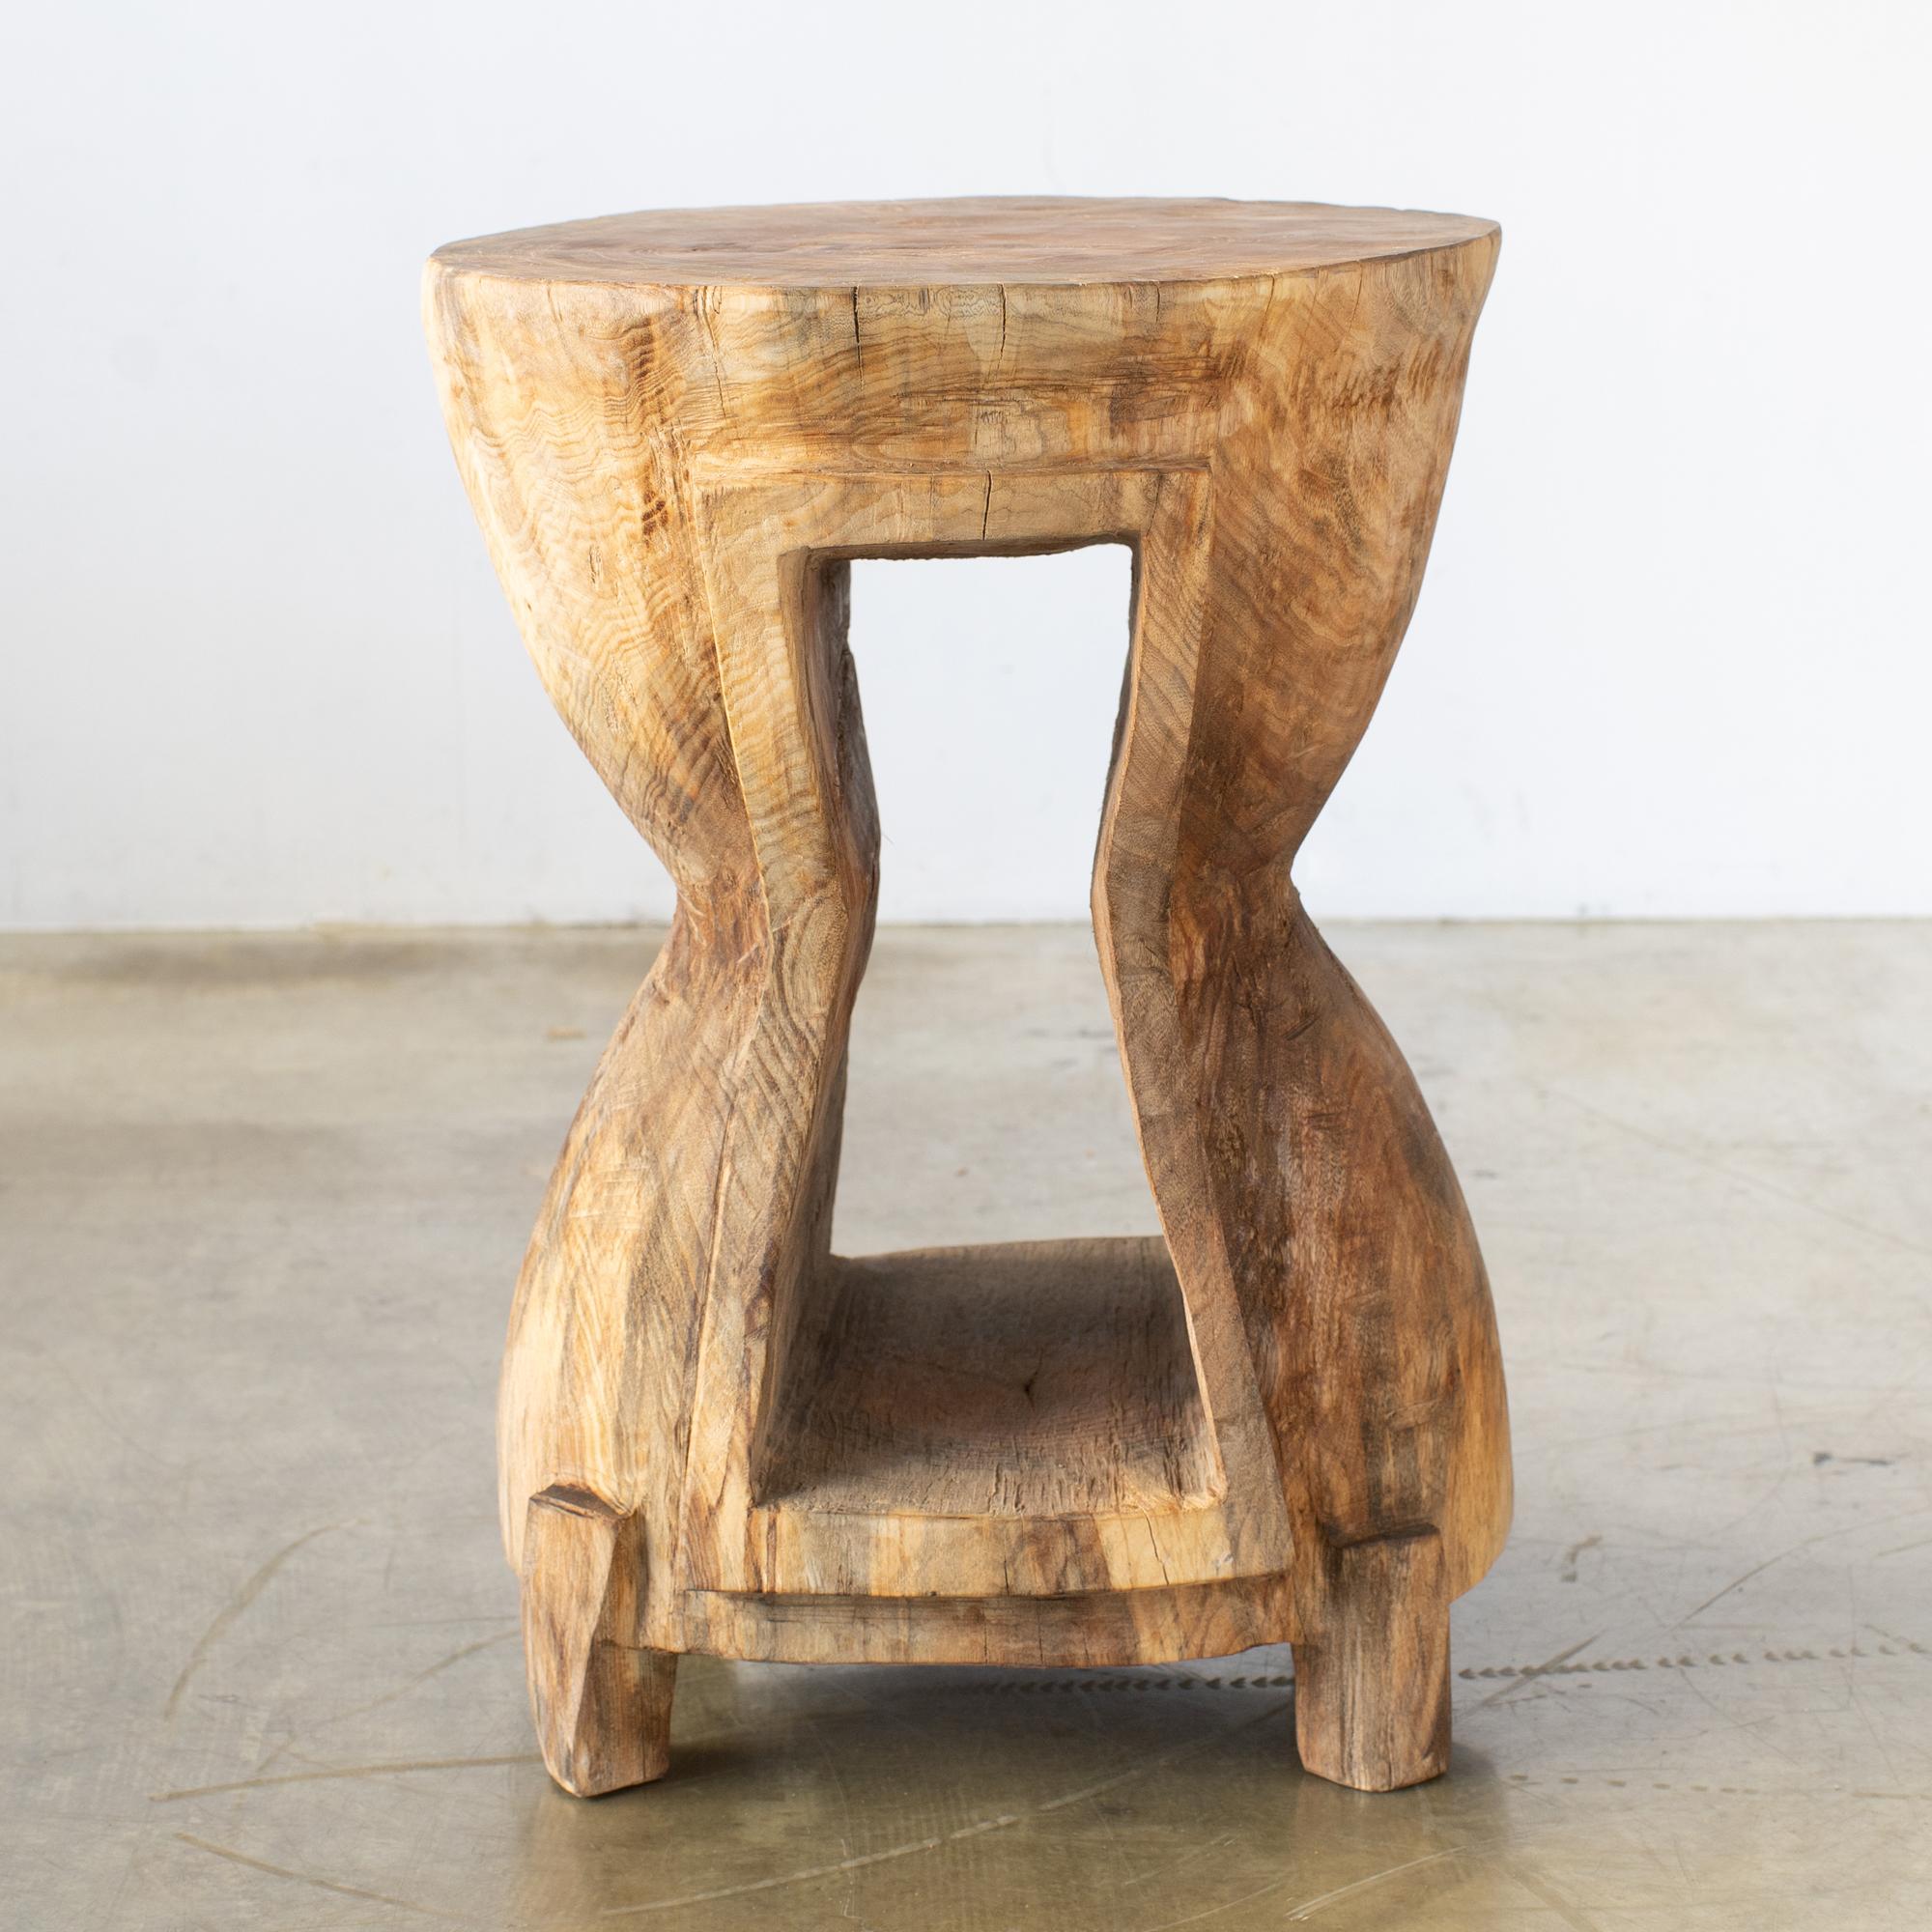 Name: Televisore Lunga
Sculptural stool by Hiroyuki Nishimura and Zougei carved furniture
Material: White oak
This work is carved from log with some kinds of chainsaws.
Most of wood used for Nishimura's works are unable to use anything, these